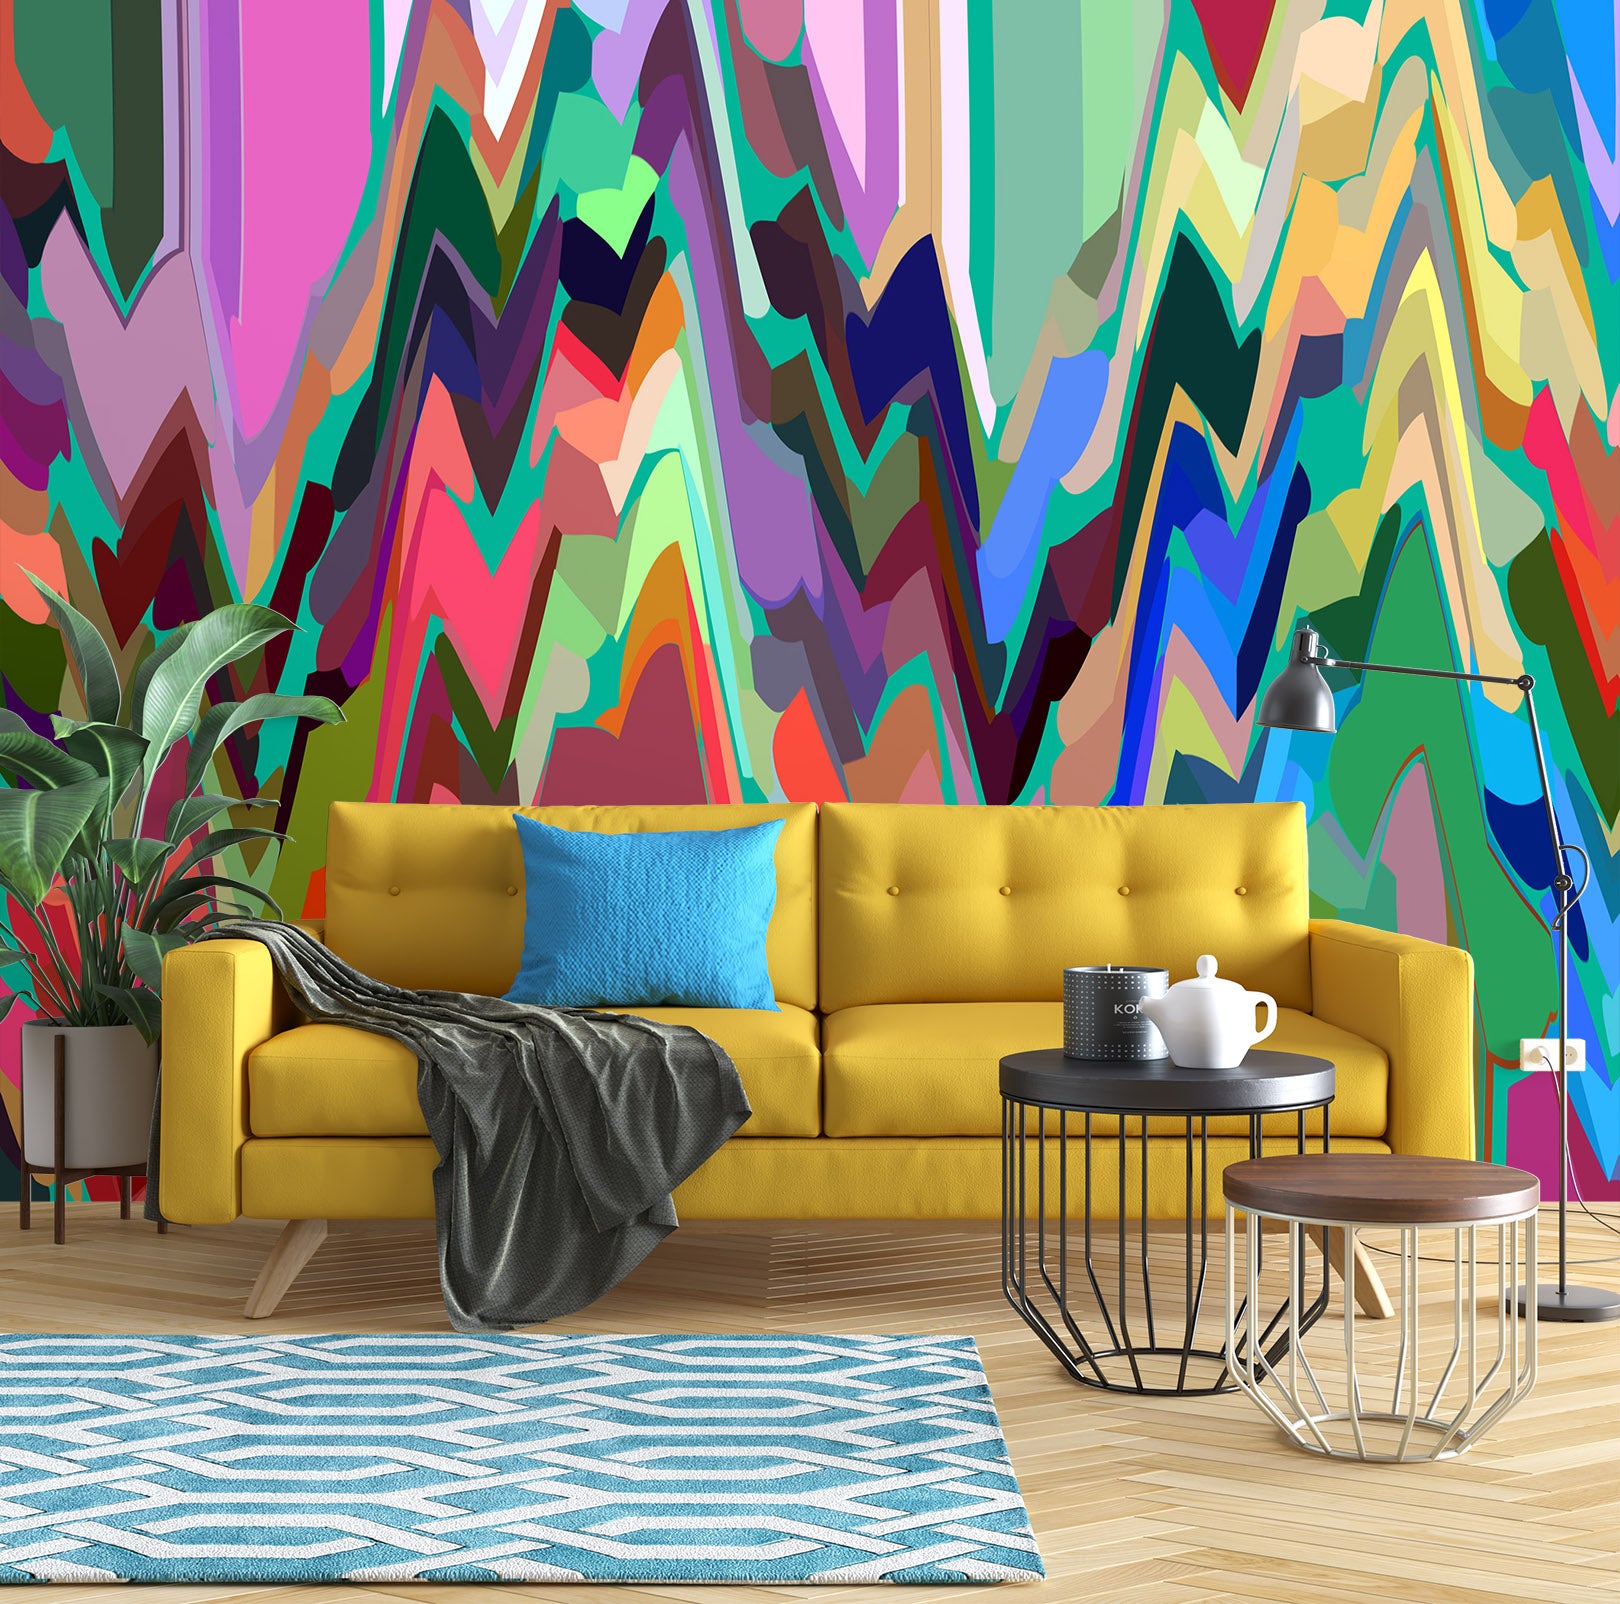 3D Colored Trees 70122 Shandra Smith Wall Mural Wall Murals